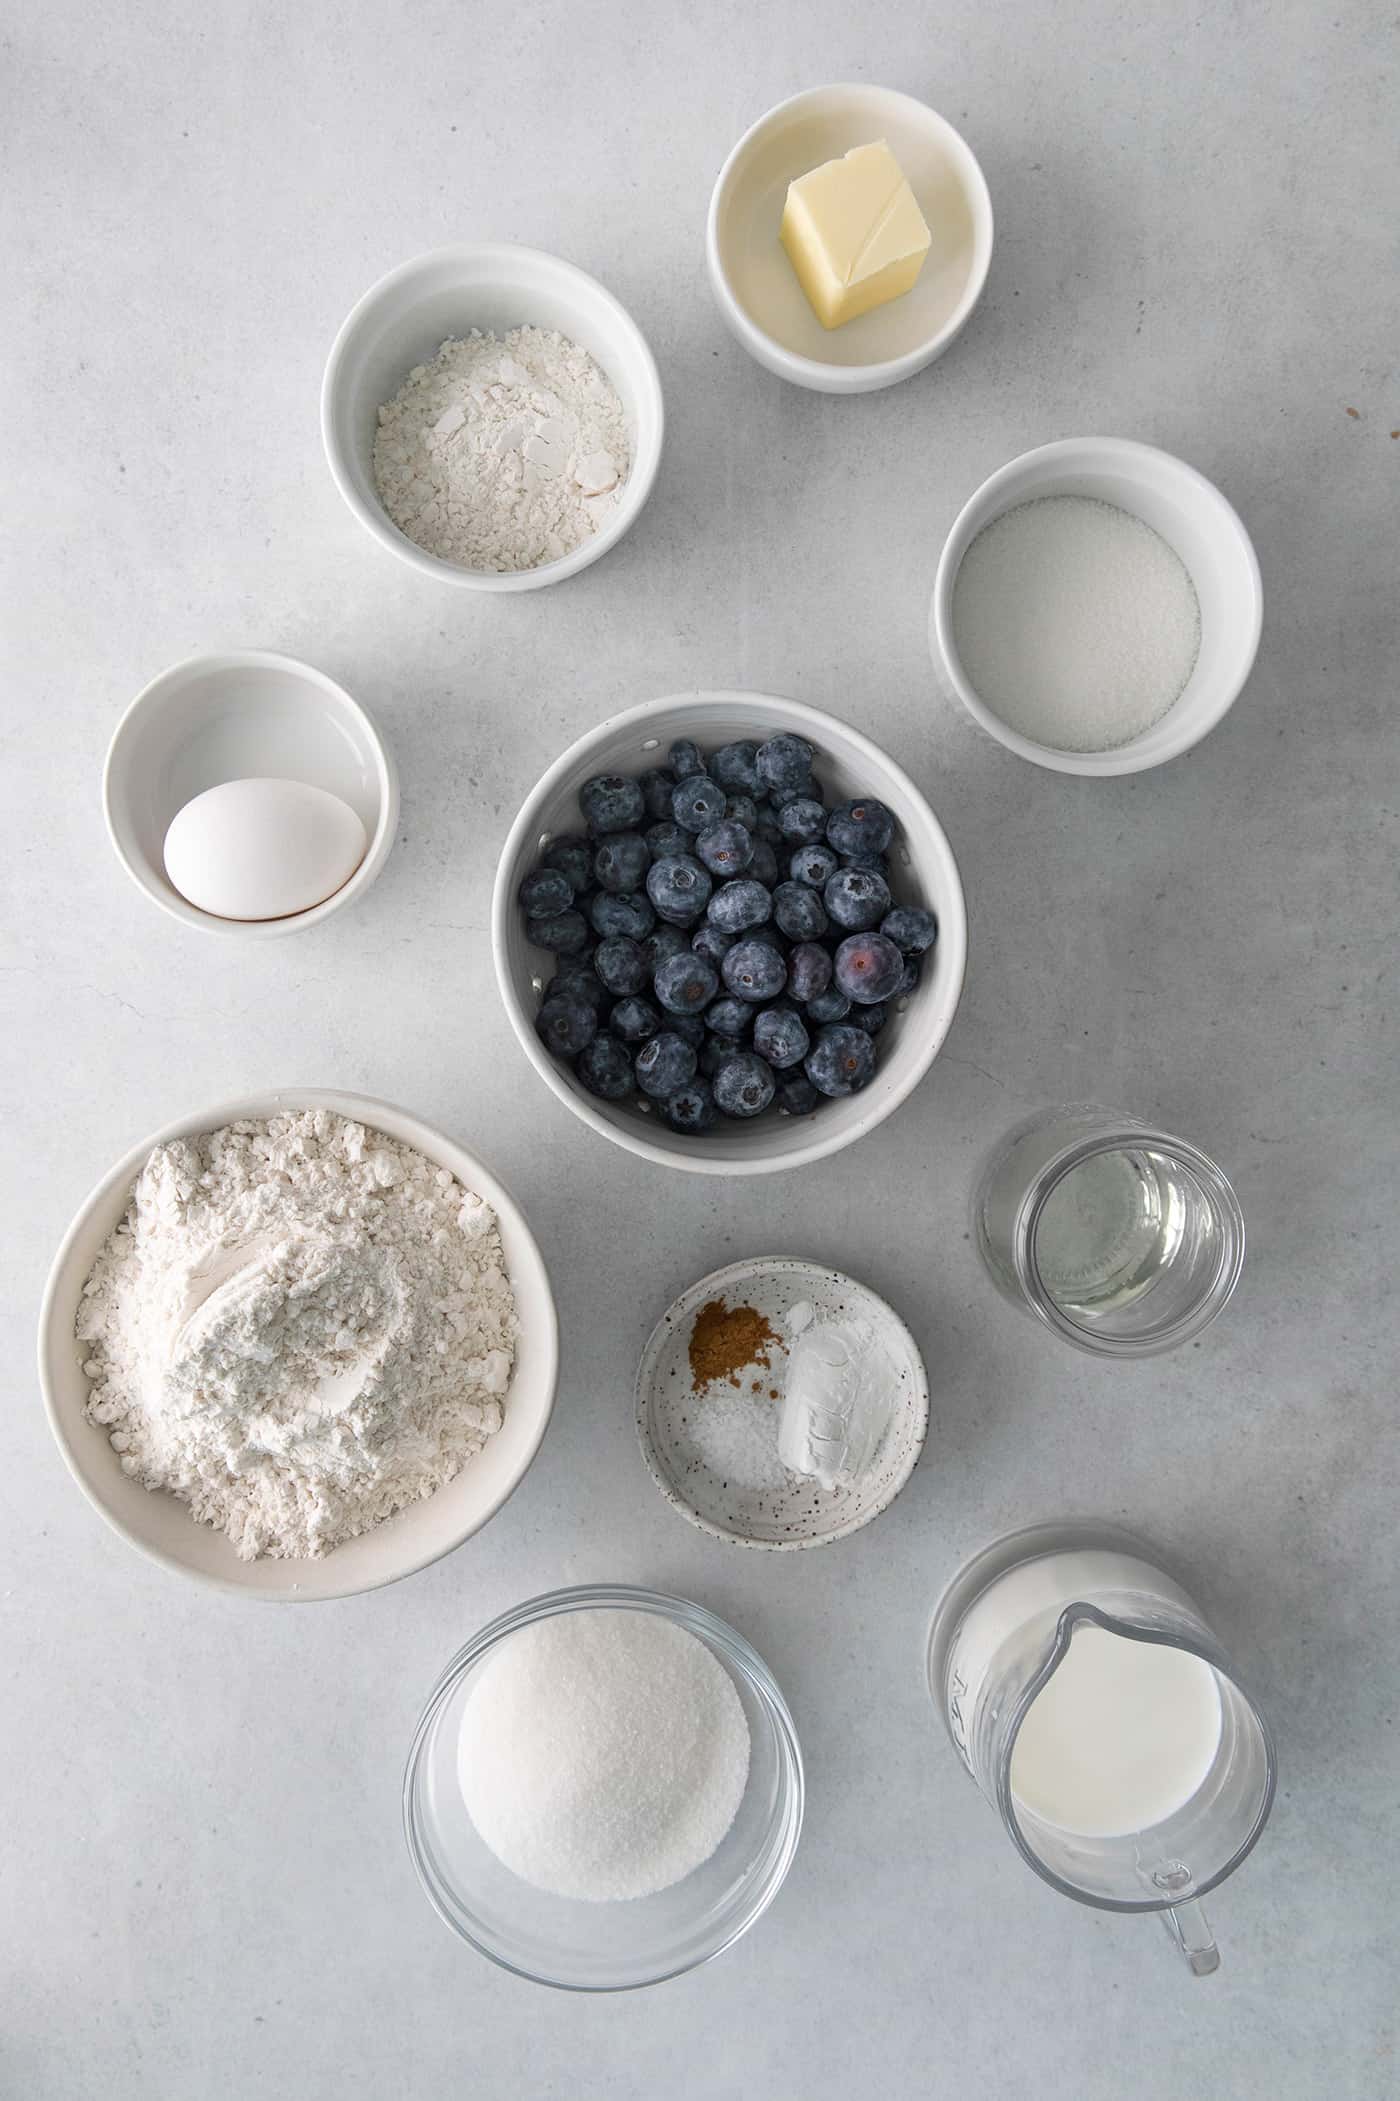 Overhead view of blueberry muffin ingredients